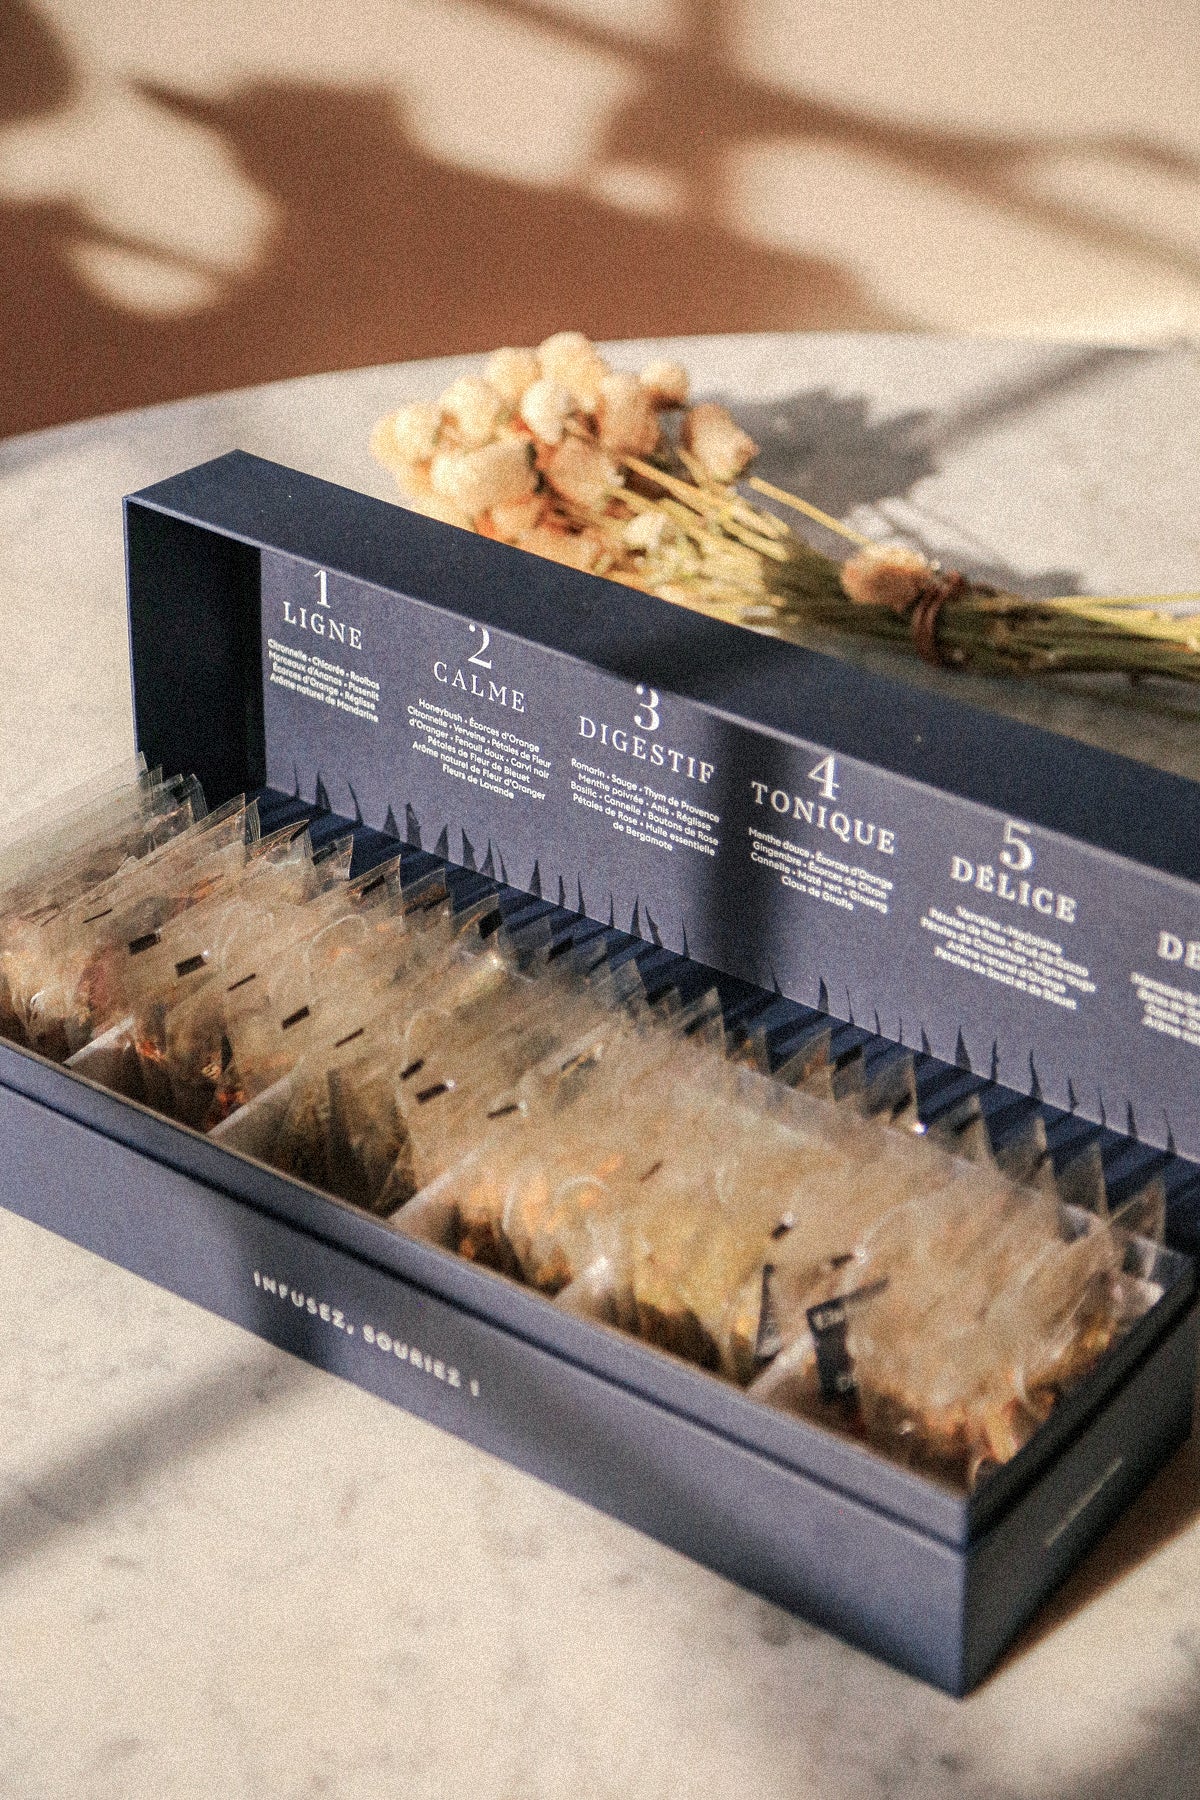 Open Infusions Tea Collection box showing the 6 signature natural herbal infusions of Parisian brand L’infuseur.